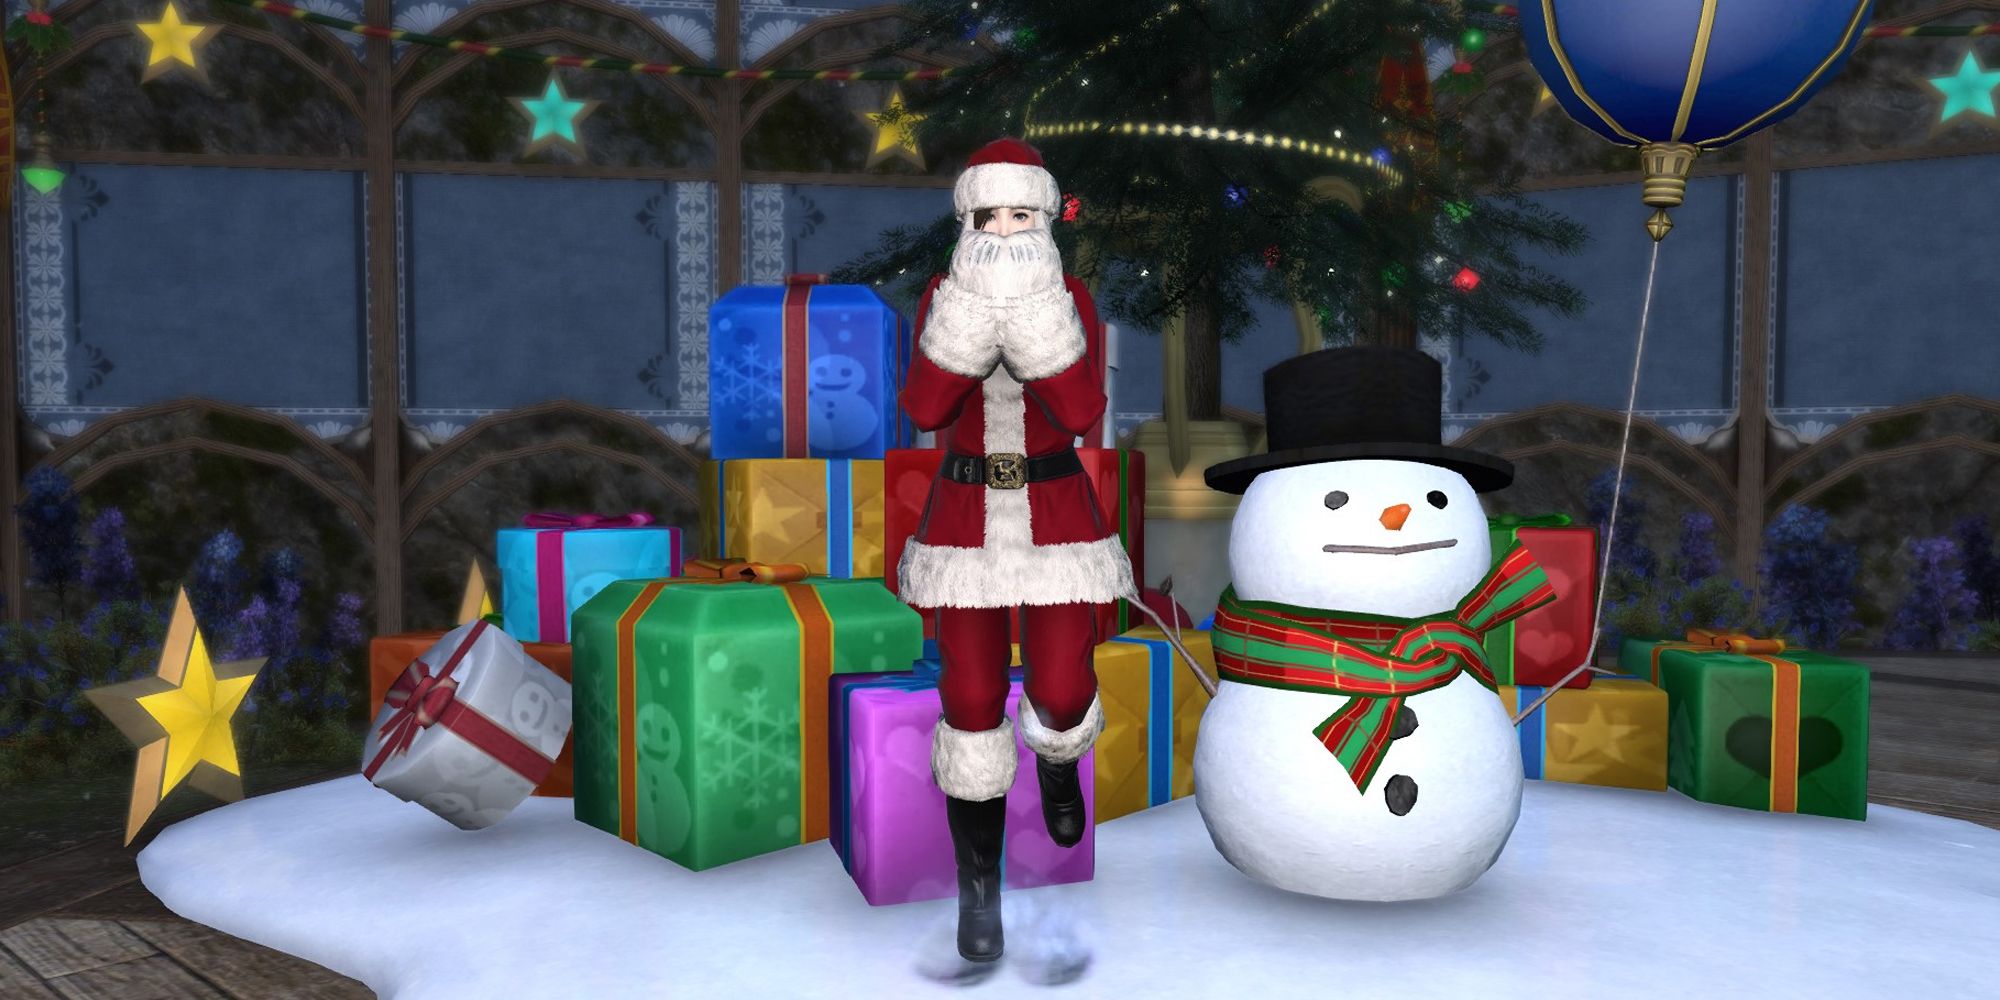 An excited player in Unorthodox Saint's gear beside a snowman in Final Fantasy 14.